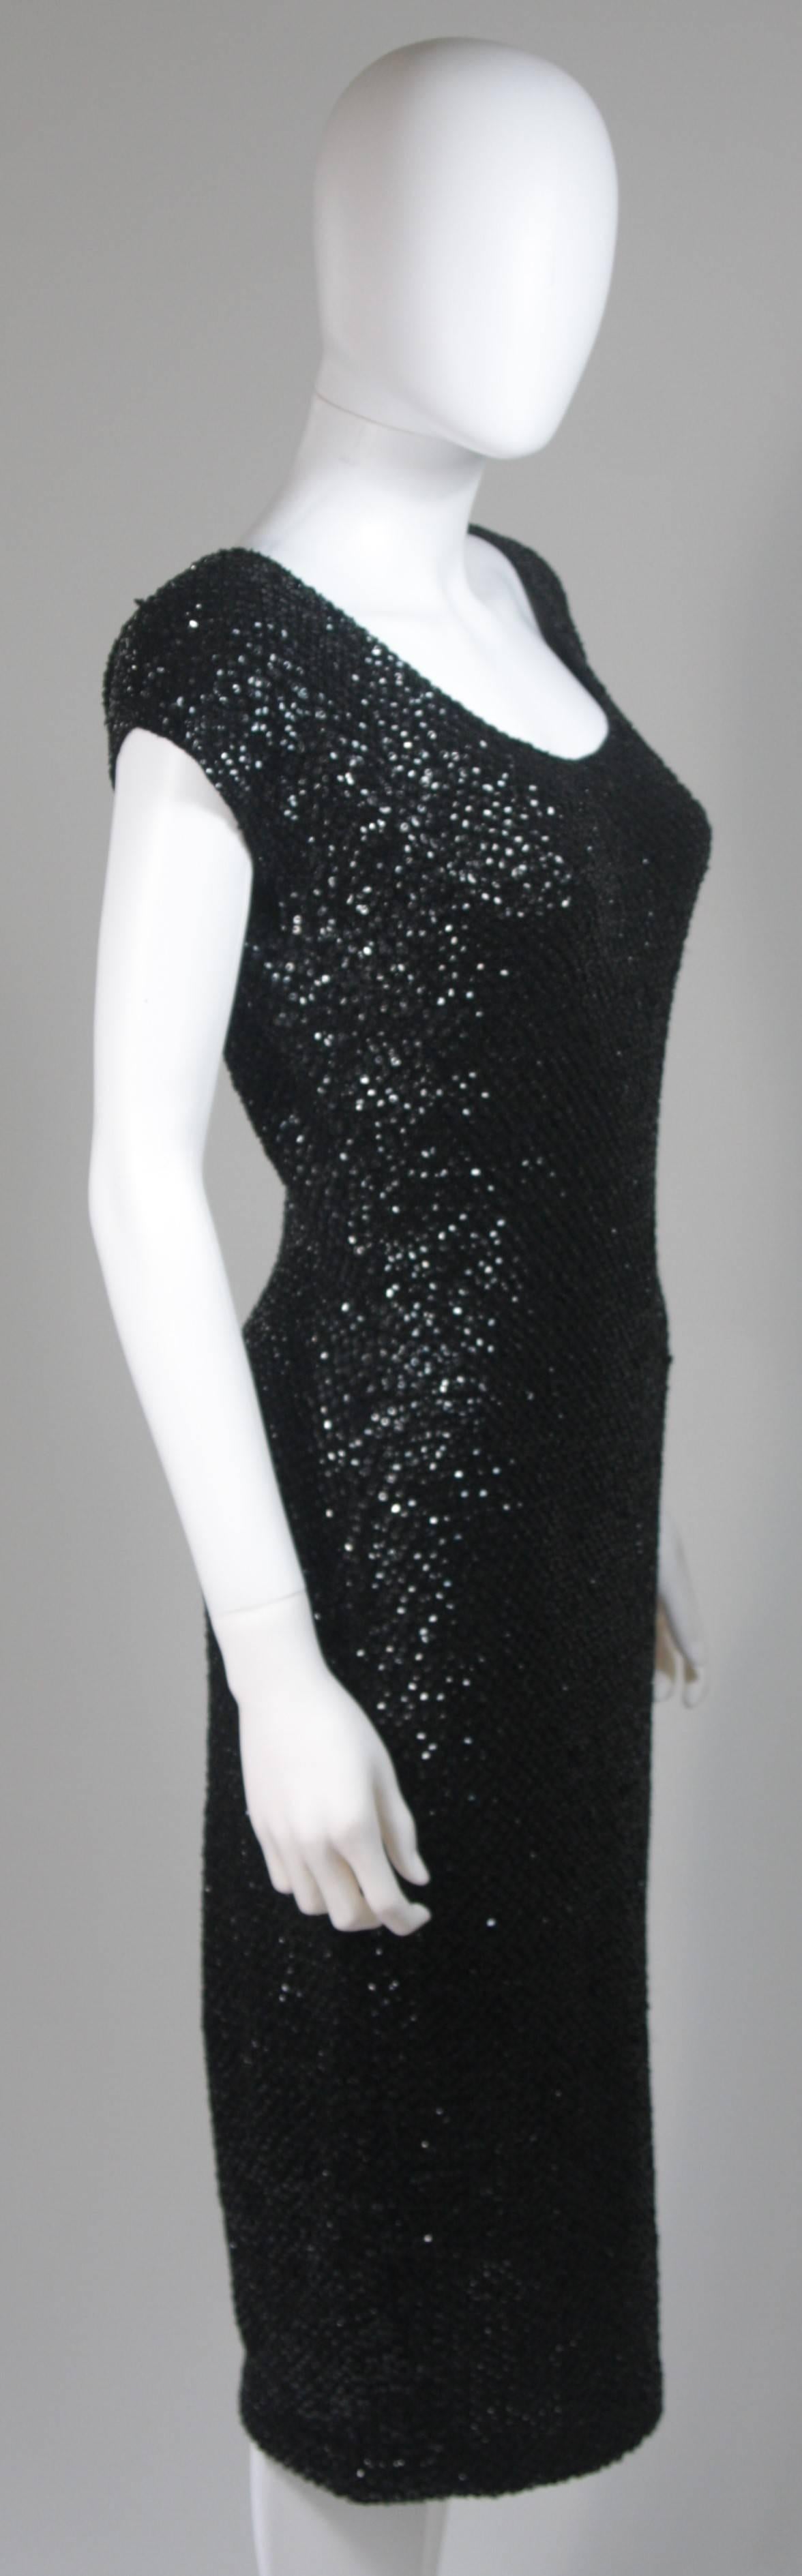 Gene Shelly Black Knit Wool Cocktail Dress with Sequin Embellishment  For Sale 2